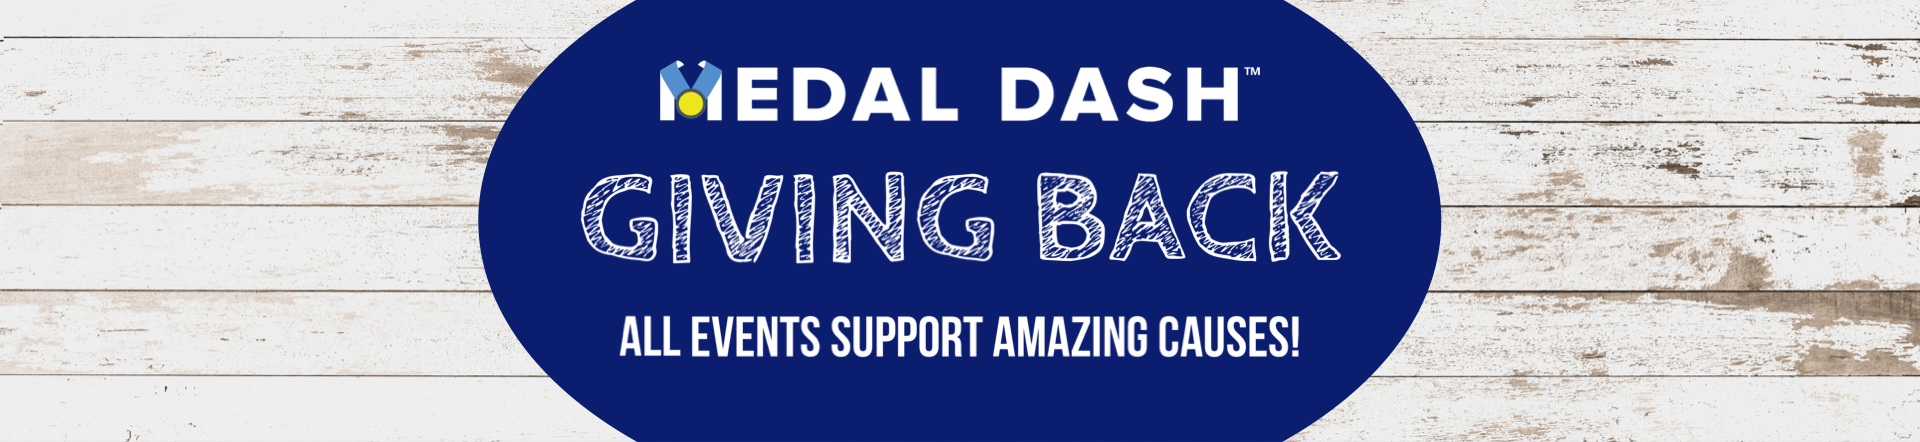 medal dash giving back page all events support amazing causes